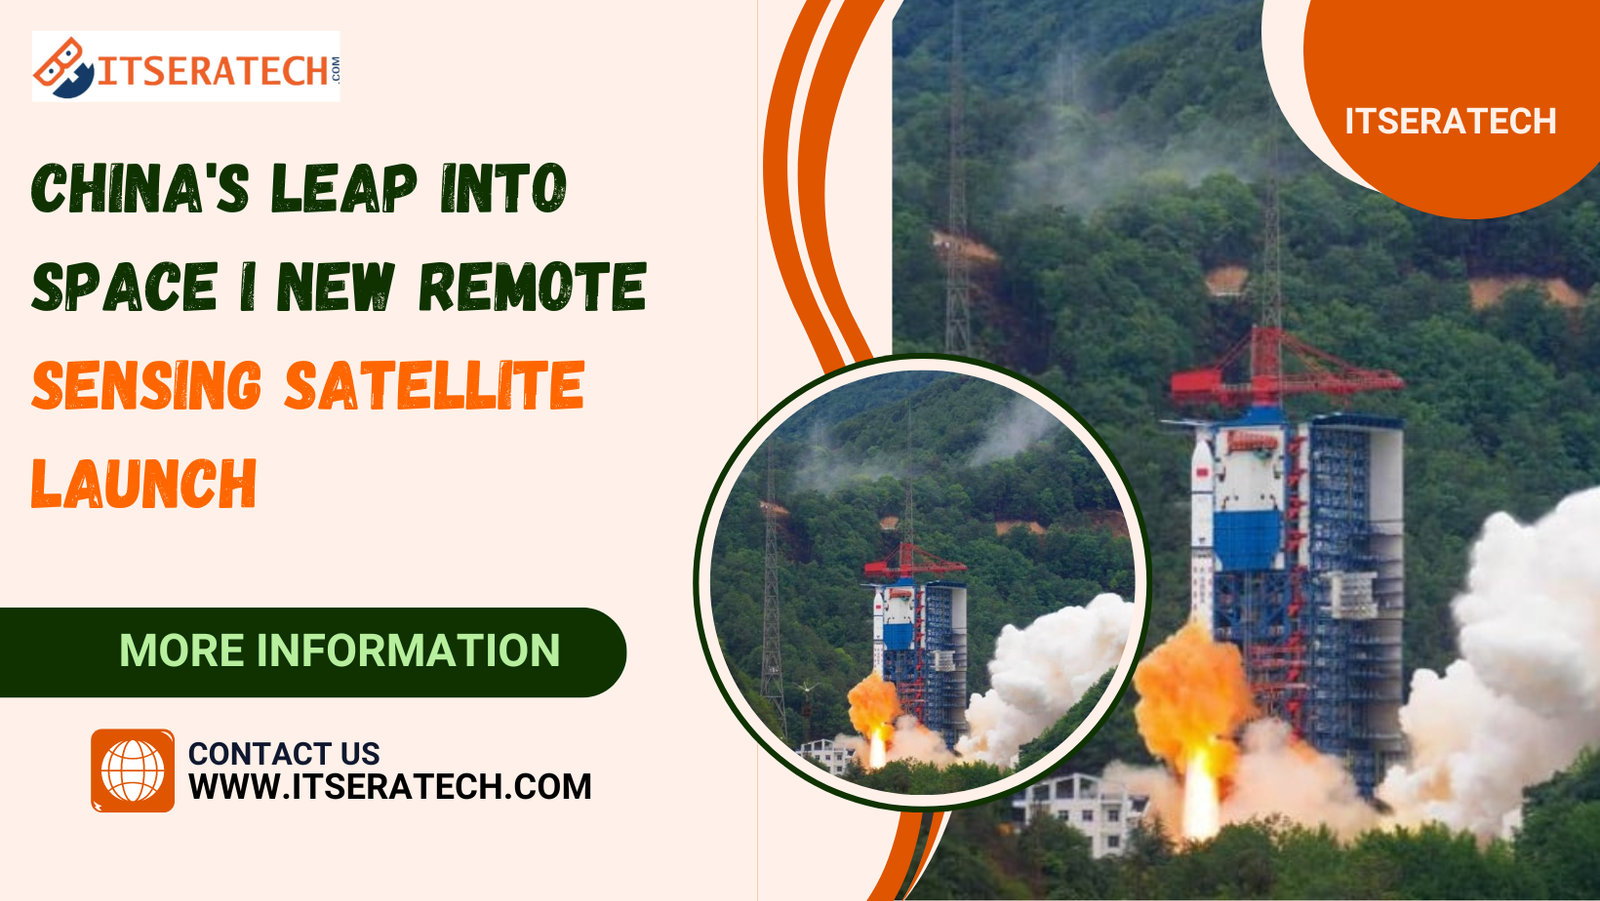 China’s Leap Into Space | New Remote Sensing Satellite Launch